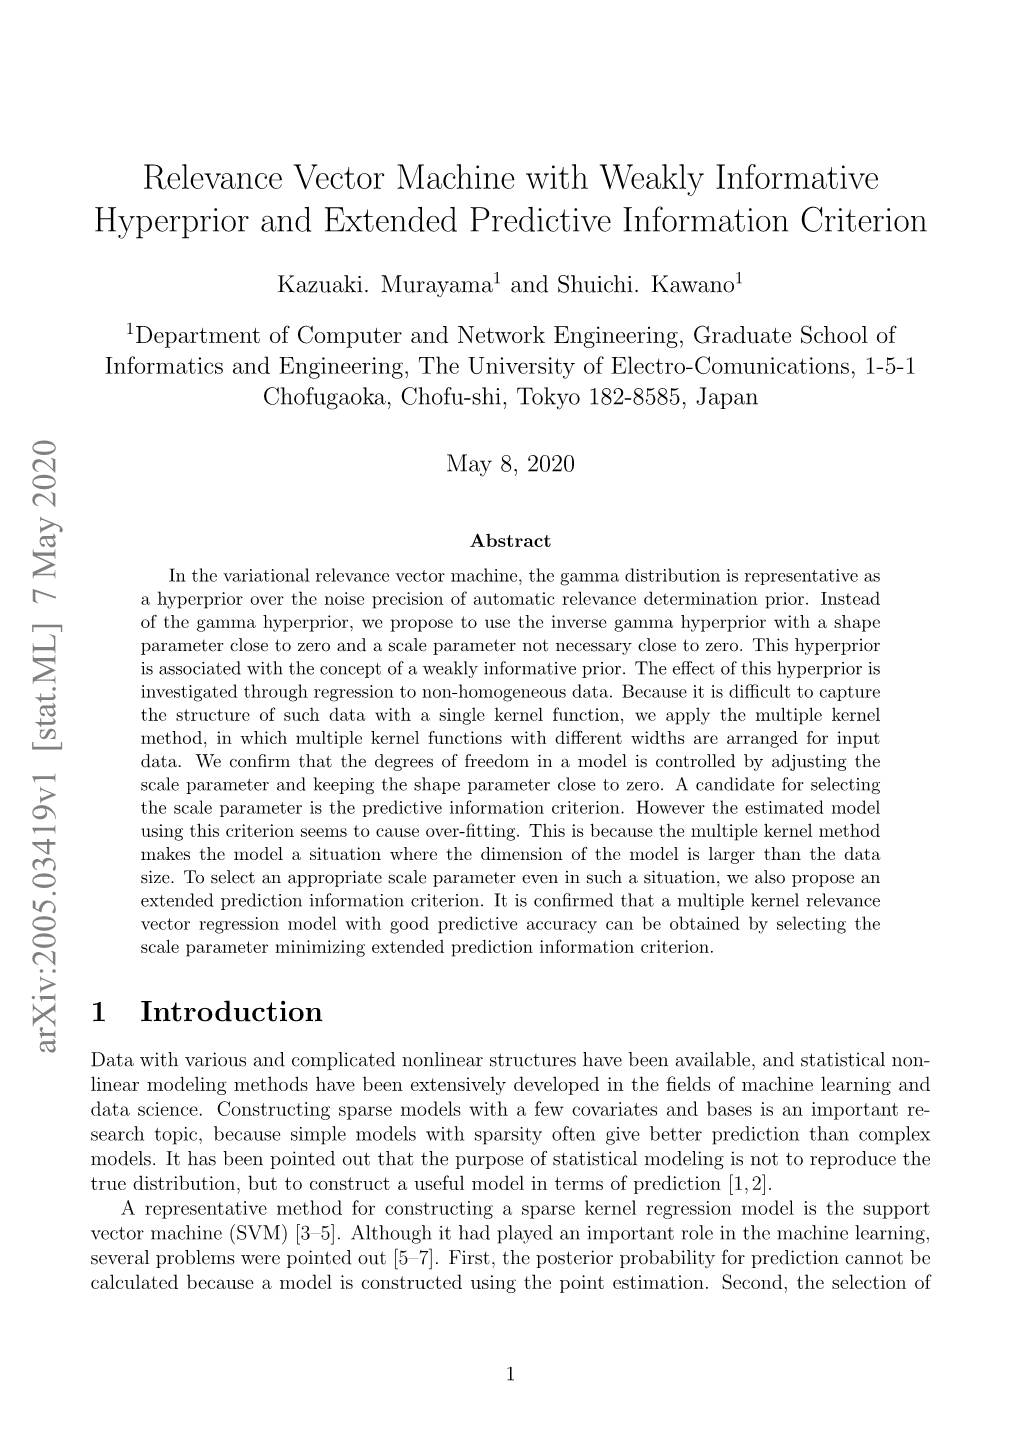 Relevance Vector Machine with Weakly Informative Hyperprior and Extended Predictive Information Criterion